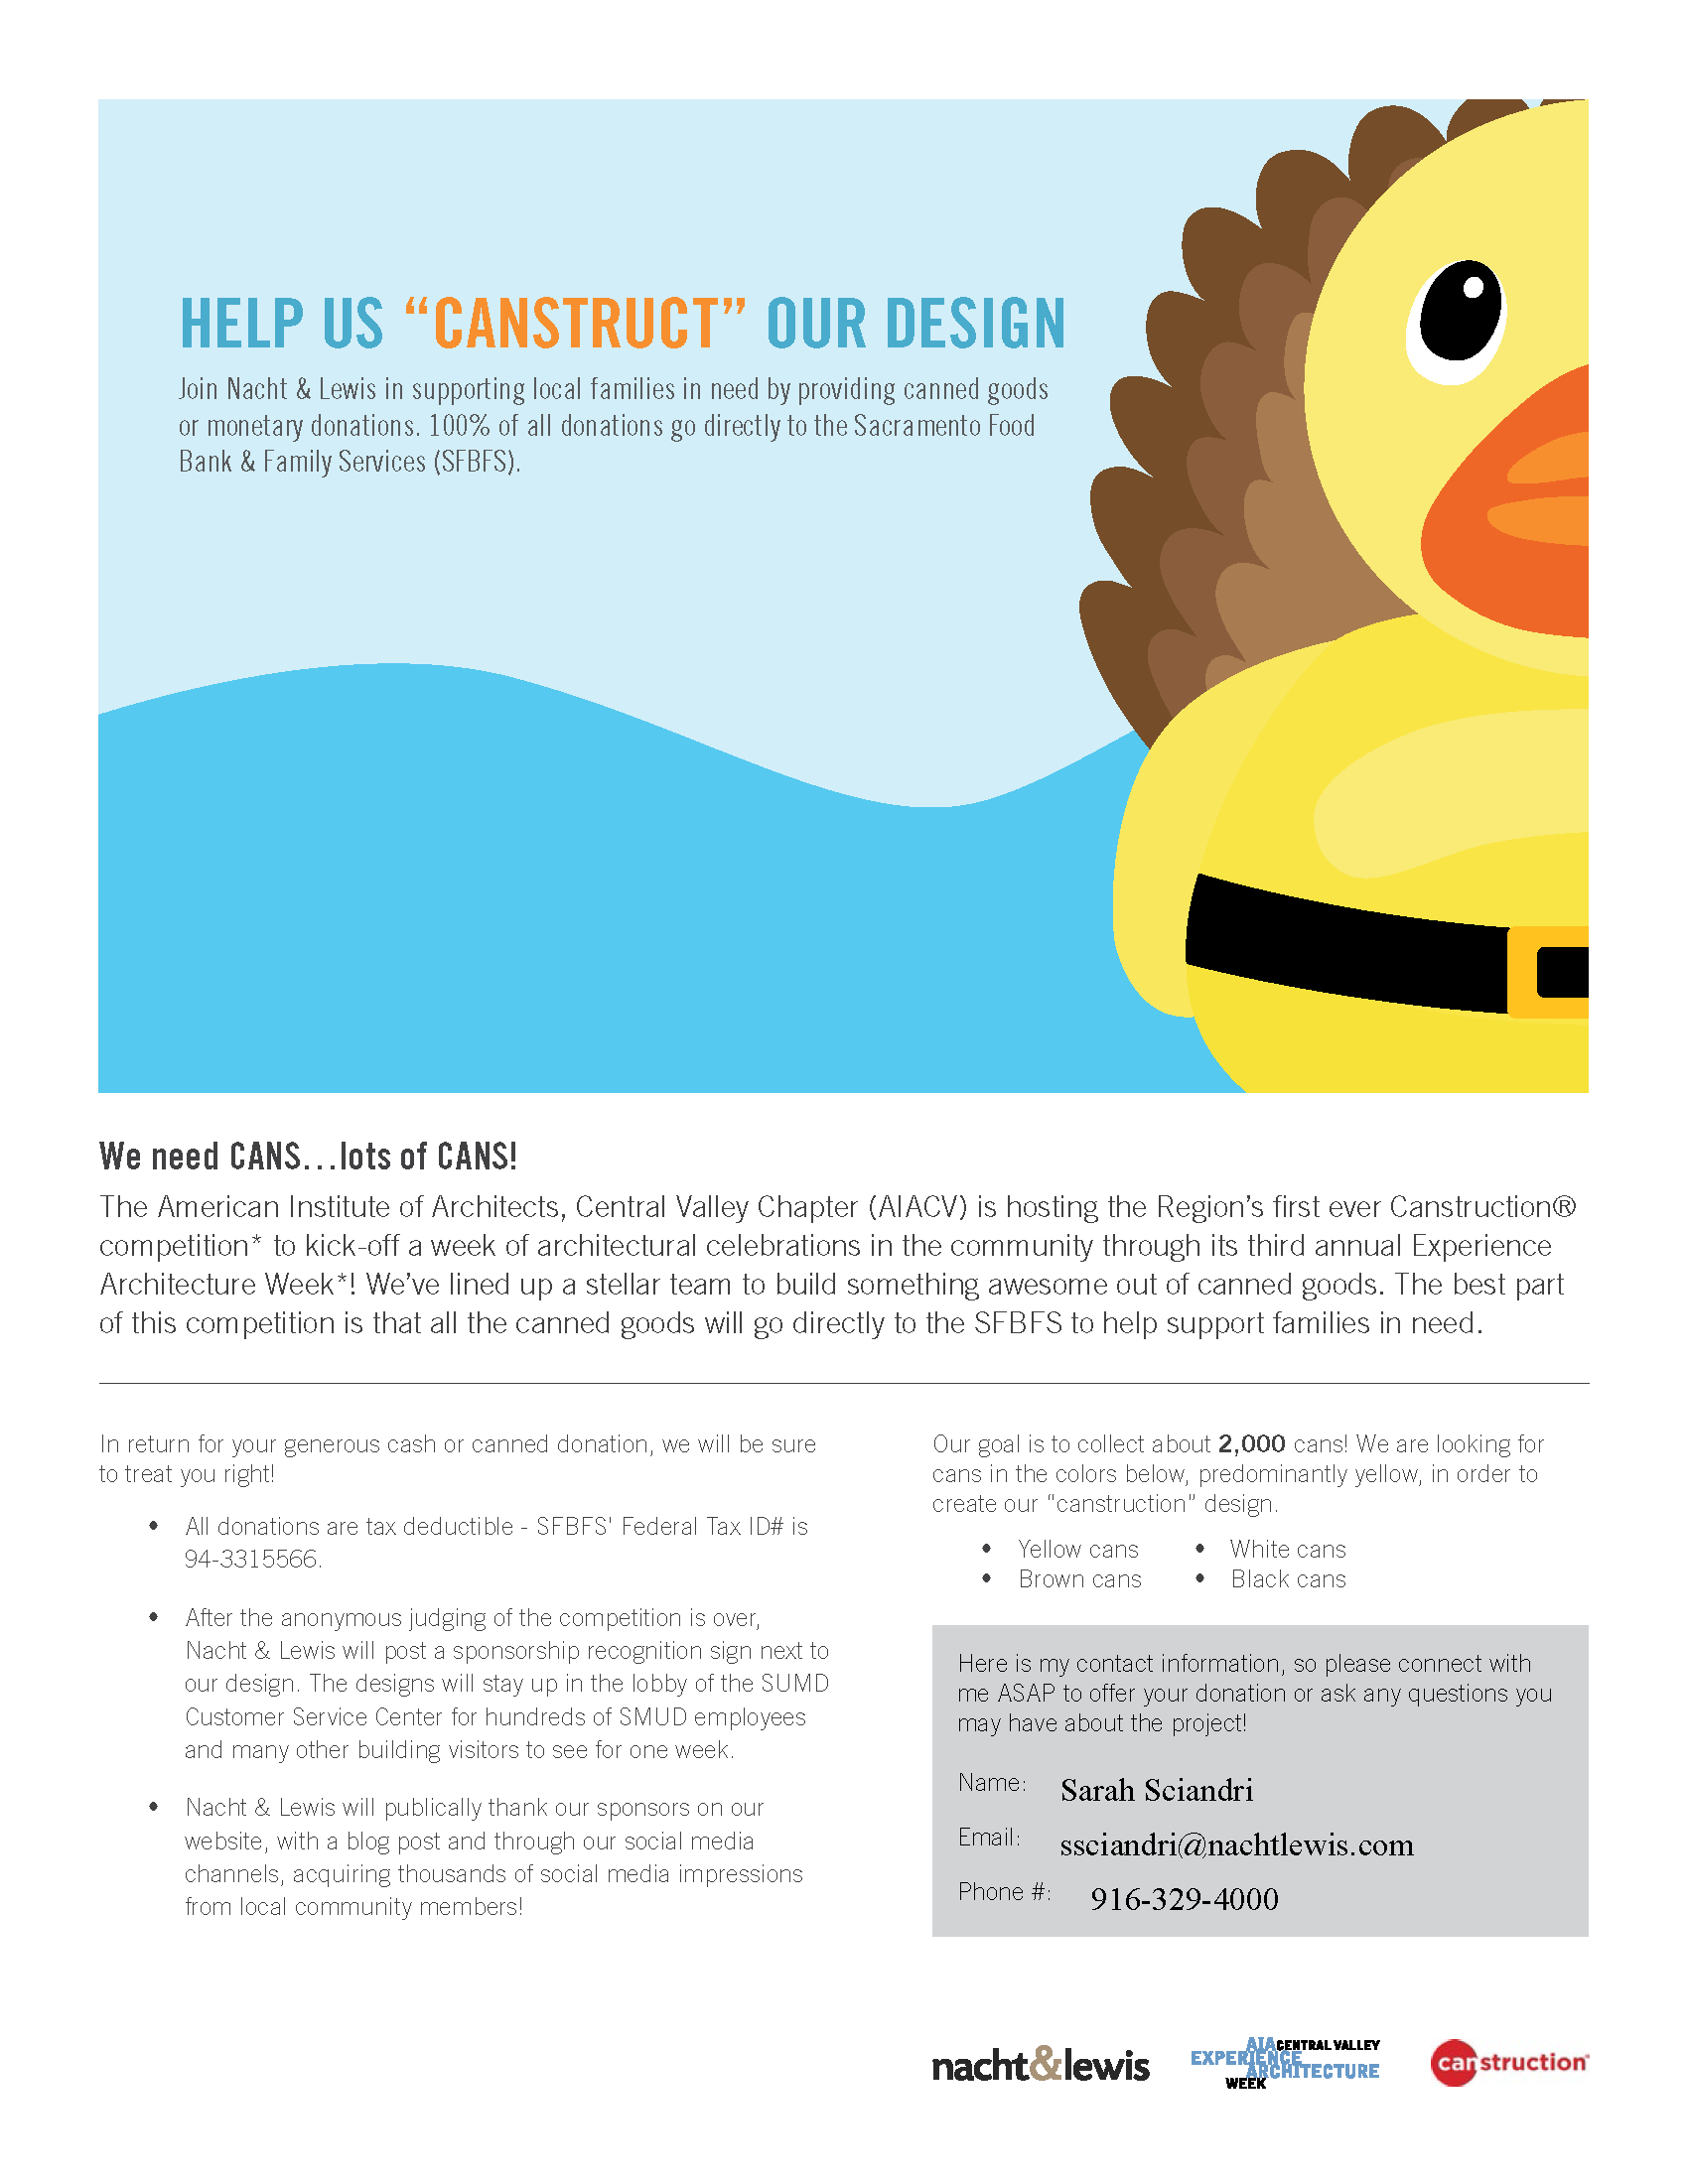 Nacht & Lewis Canstruction Flyer FINAL_9.9.14_Page_1